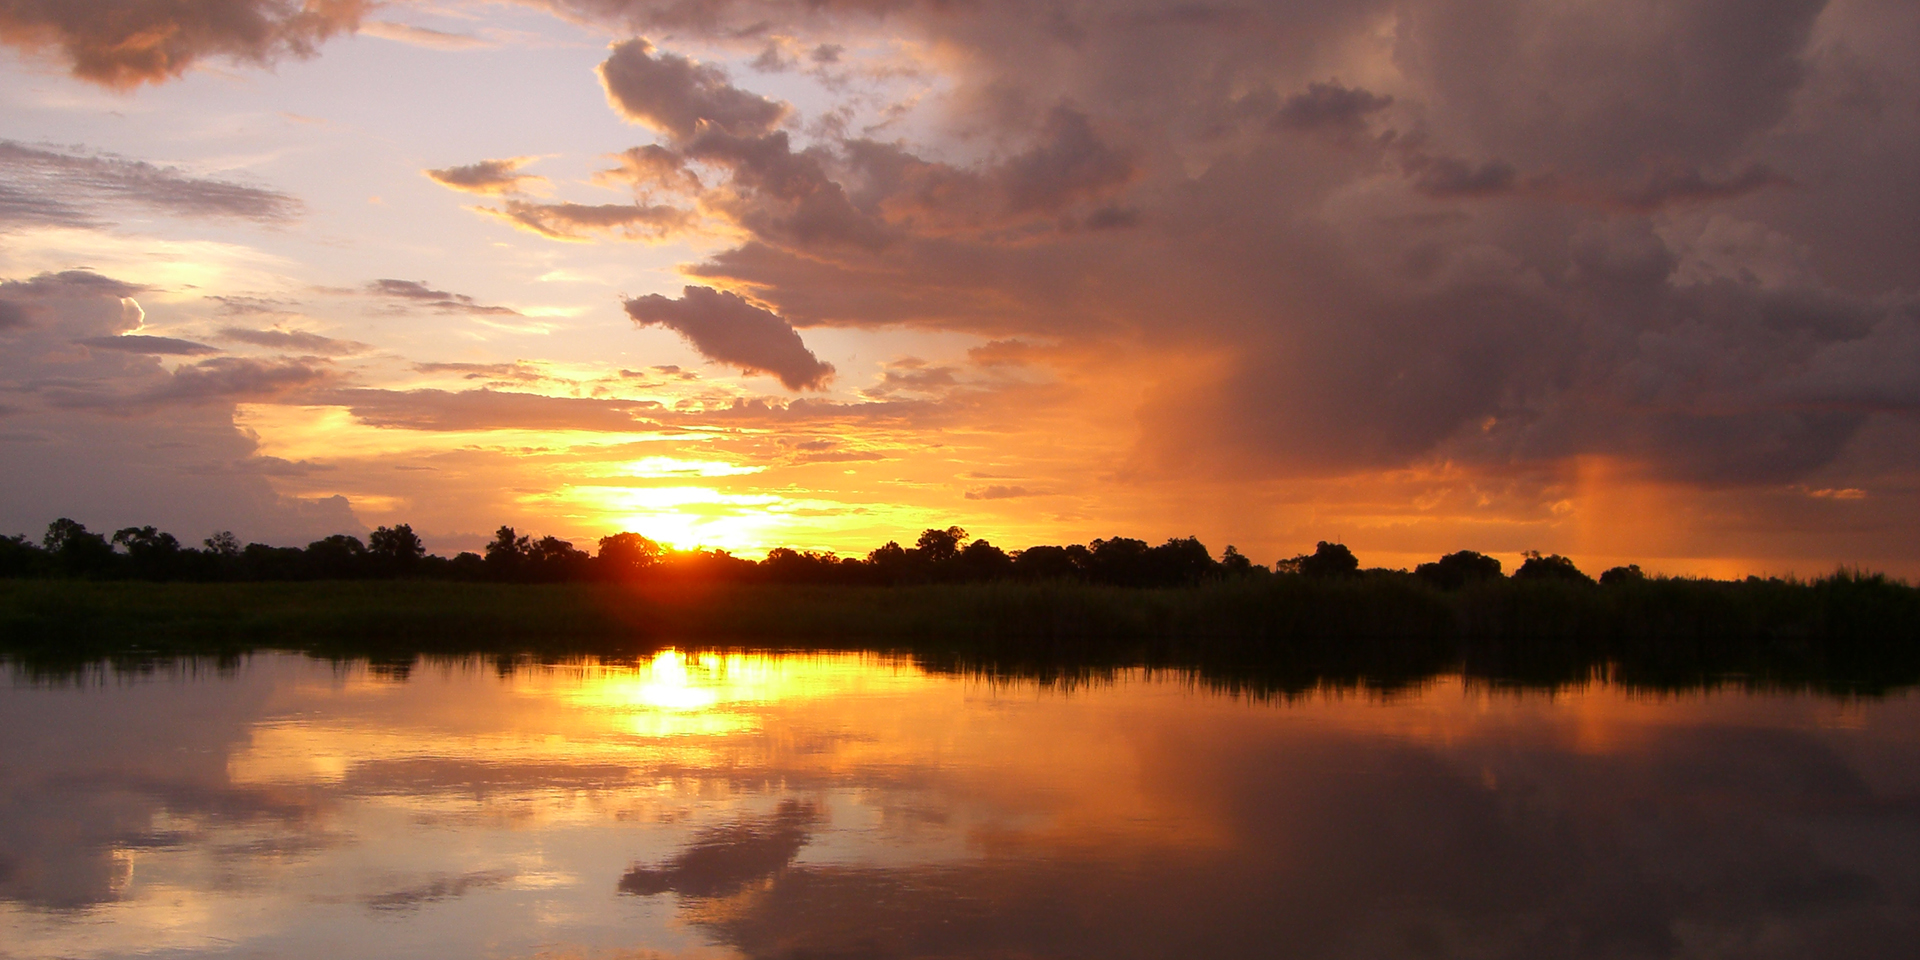 Image of the sun setting on a large lake with a forest on the horizon.